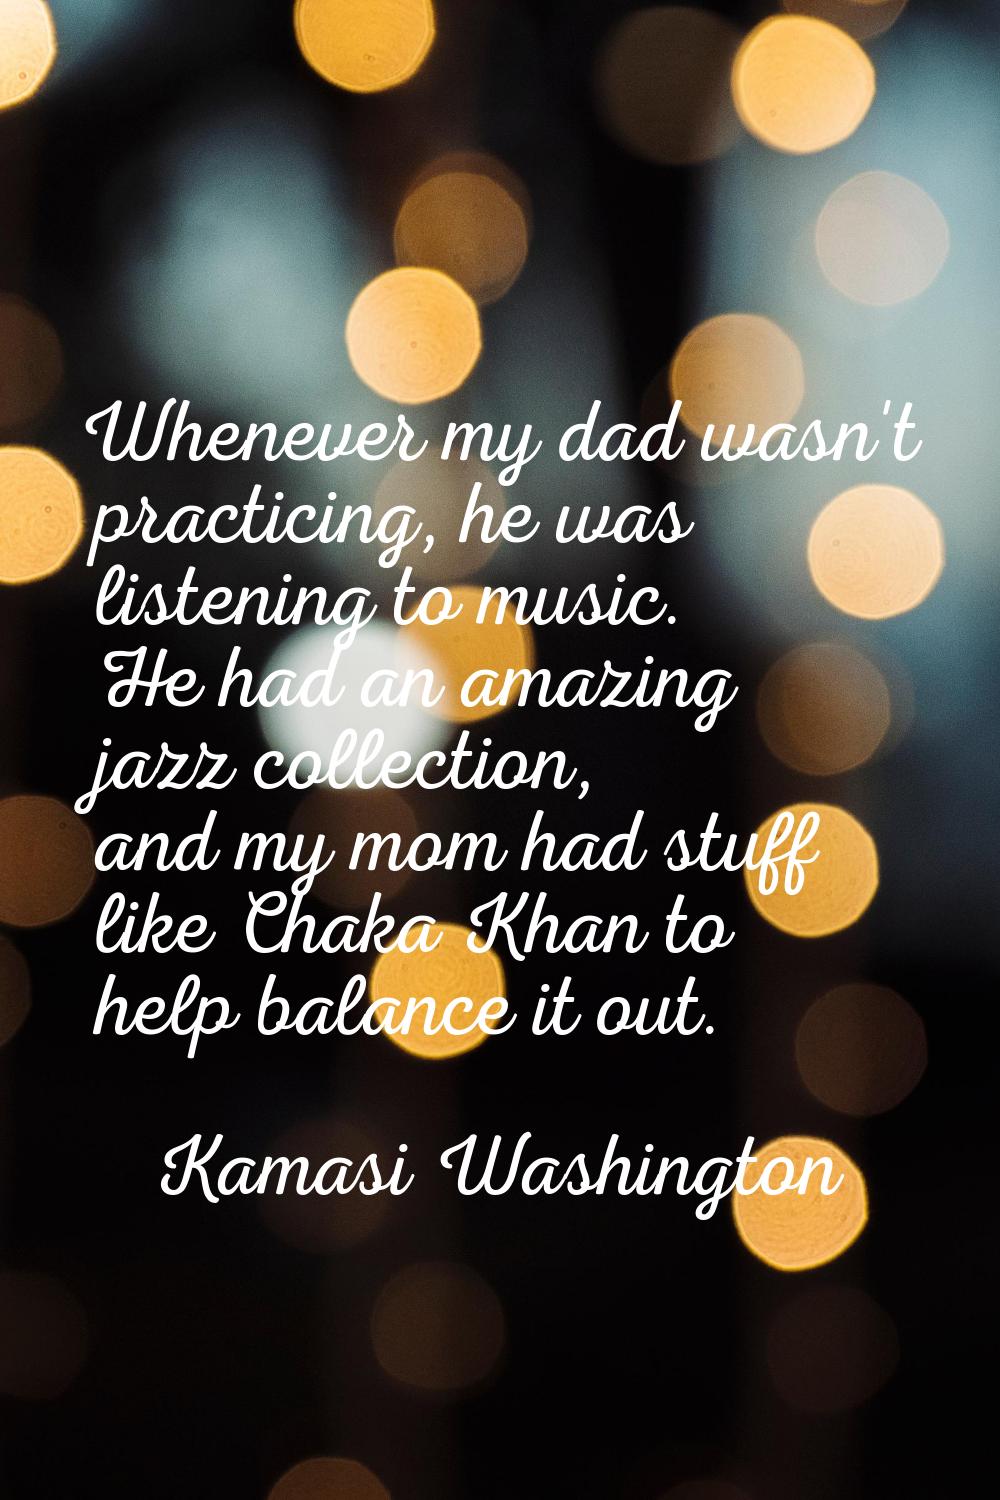 Whenever my dad wasn't practicing, he was listening to music. He had an amazing jazz collection, an